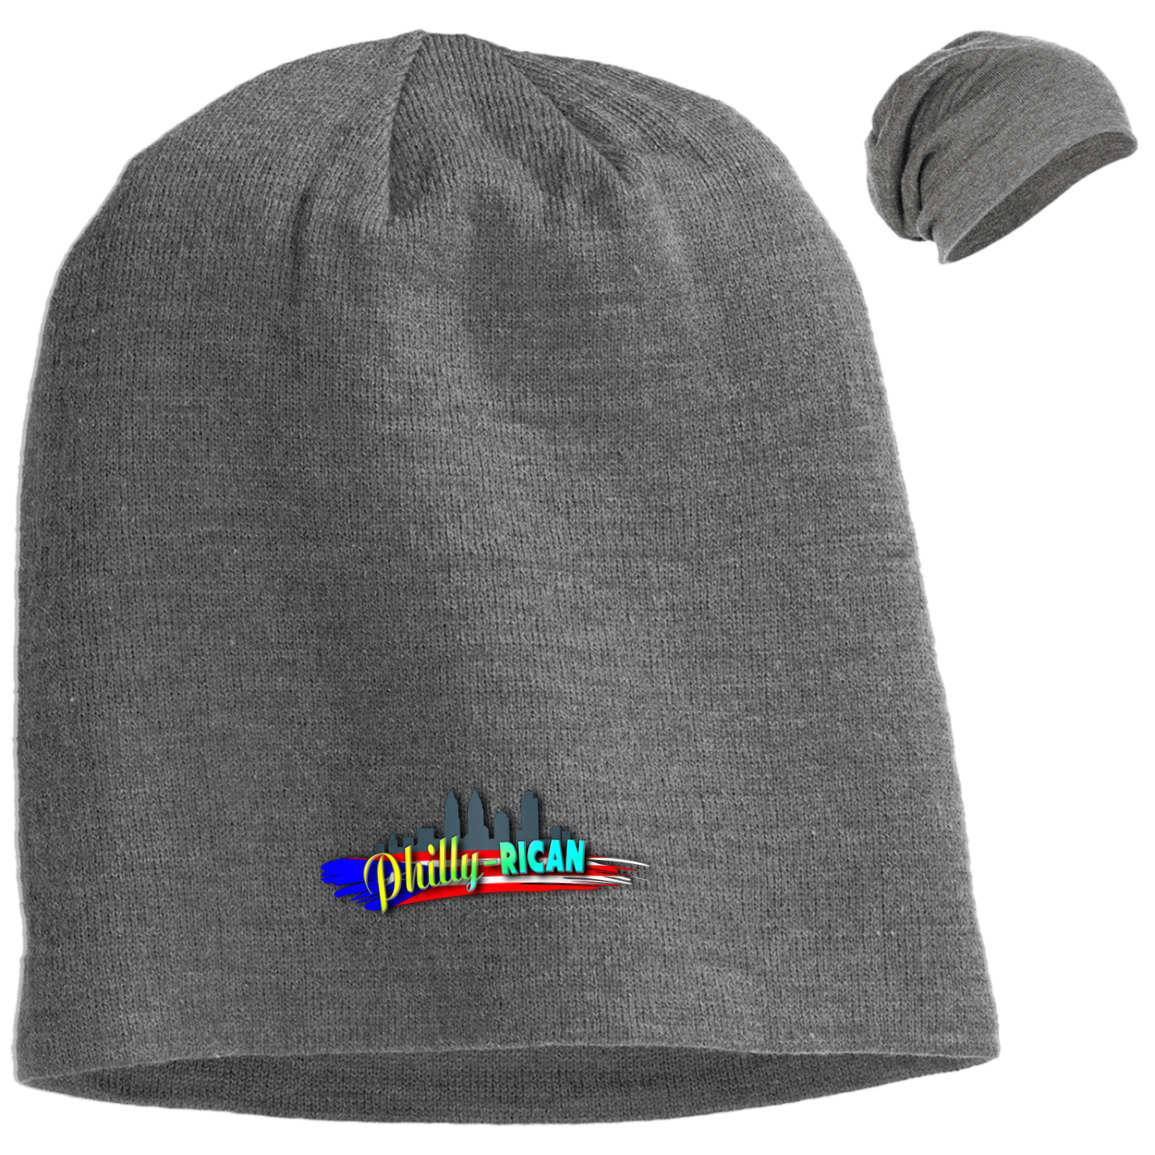 Philly-Rican Slouch Beanie - Puerto Rican Pride